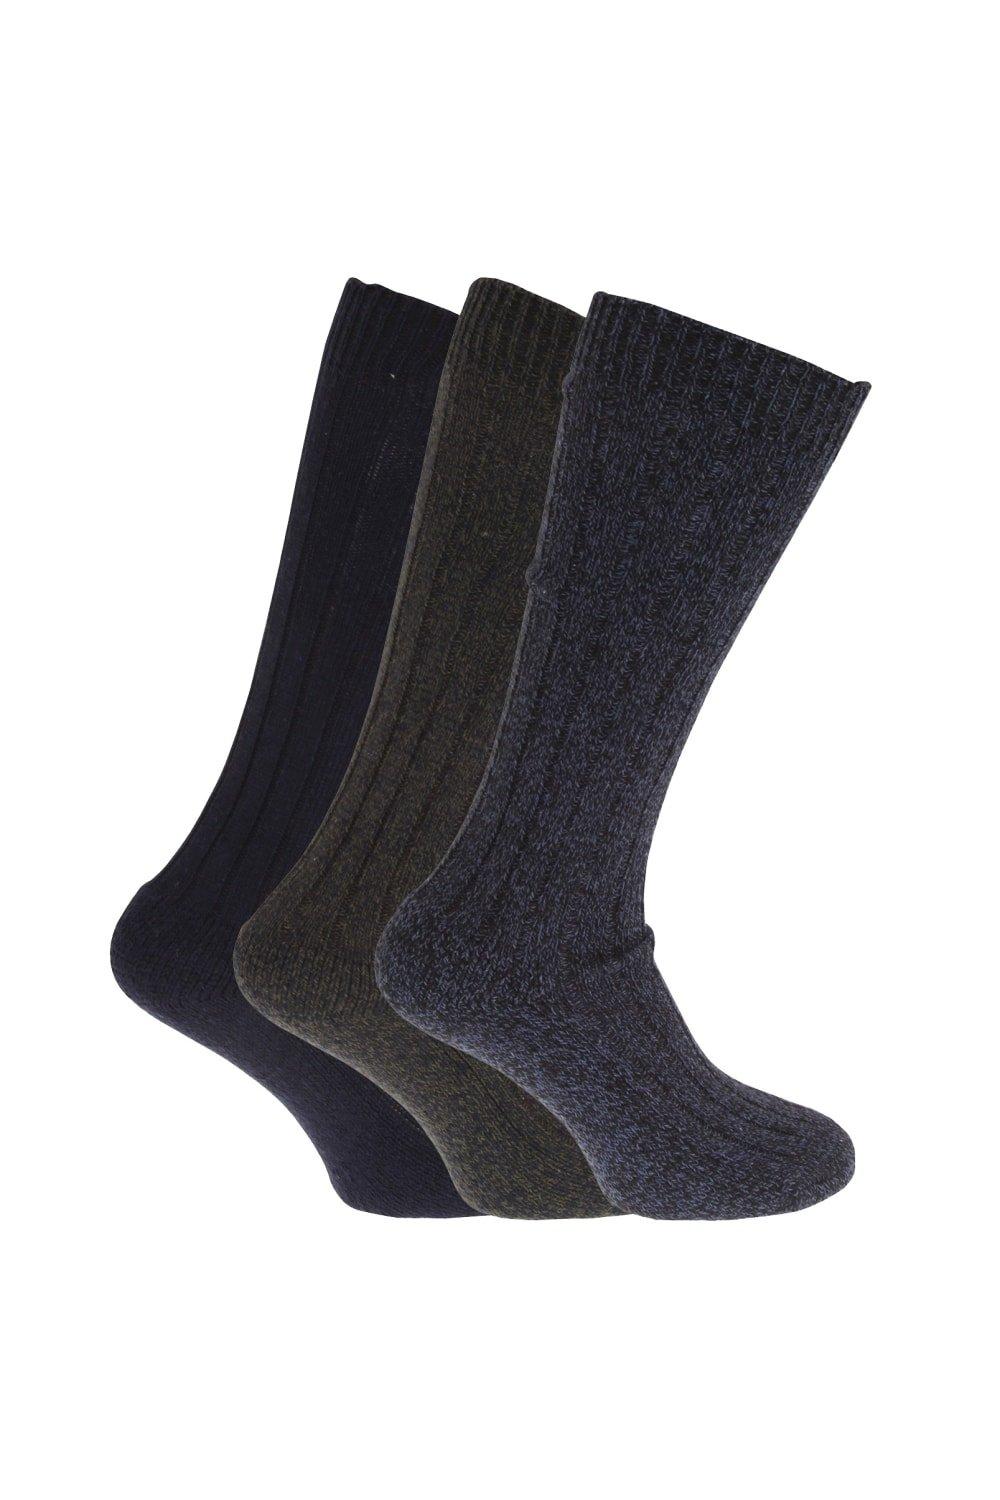 Wool Blend Long Length Socks With Padded Sole (Pack Of 3)